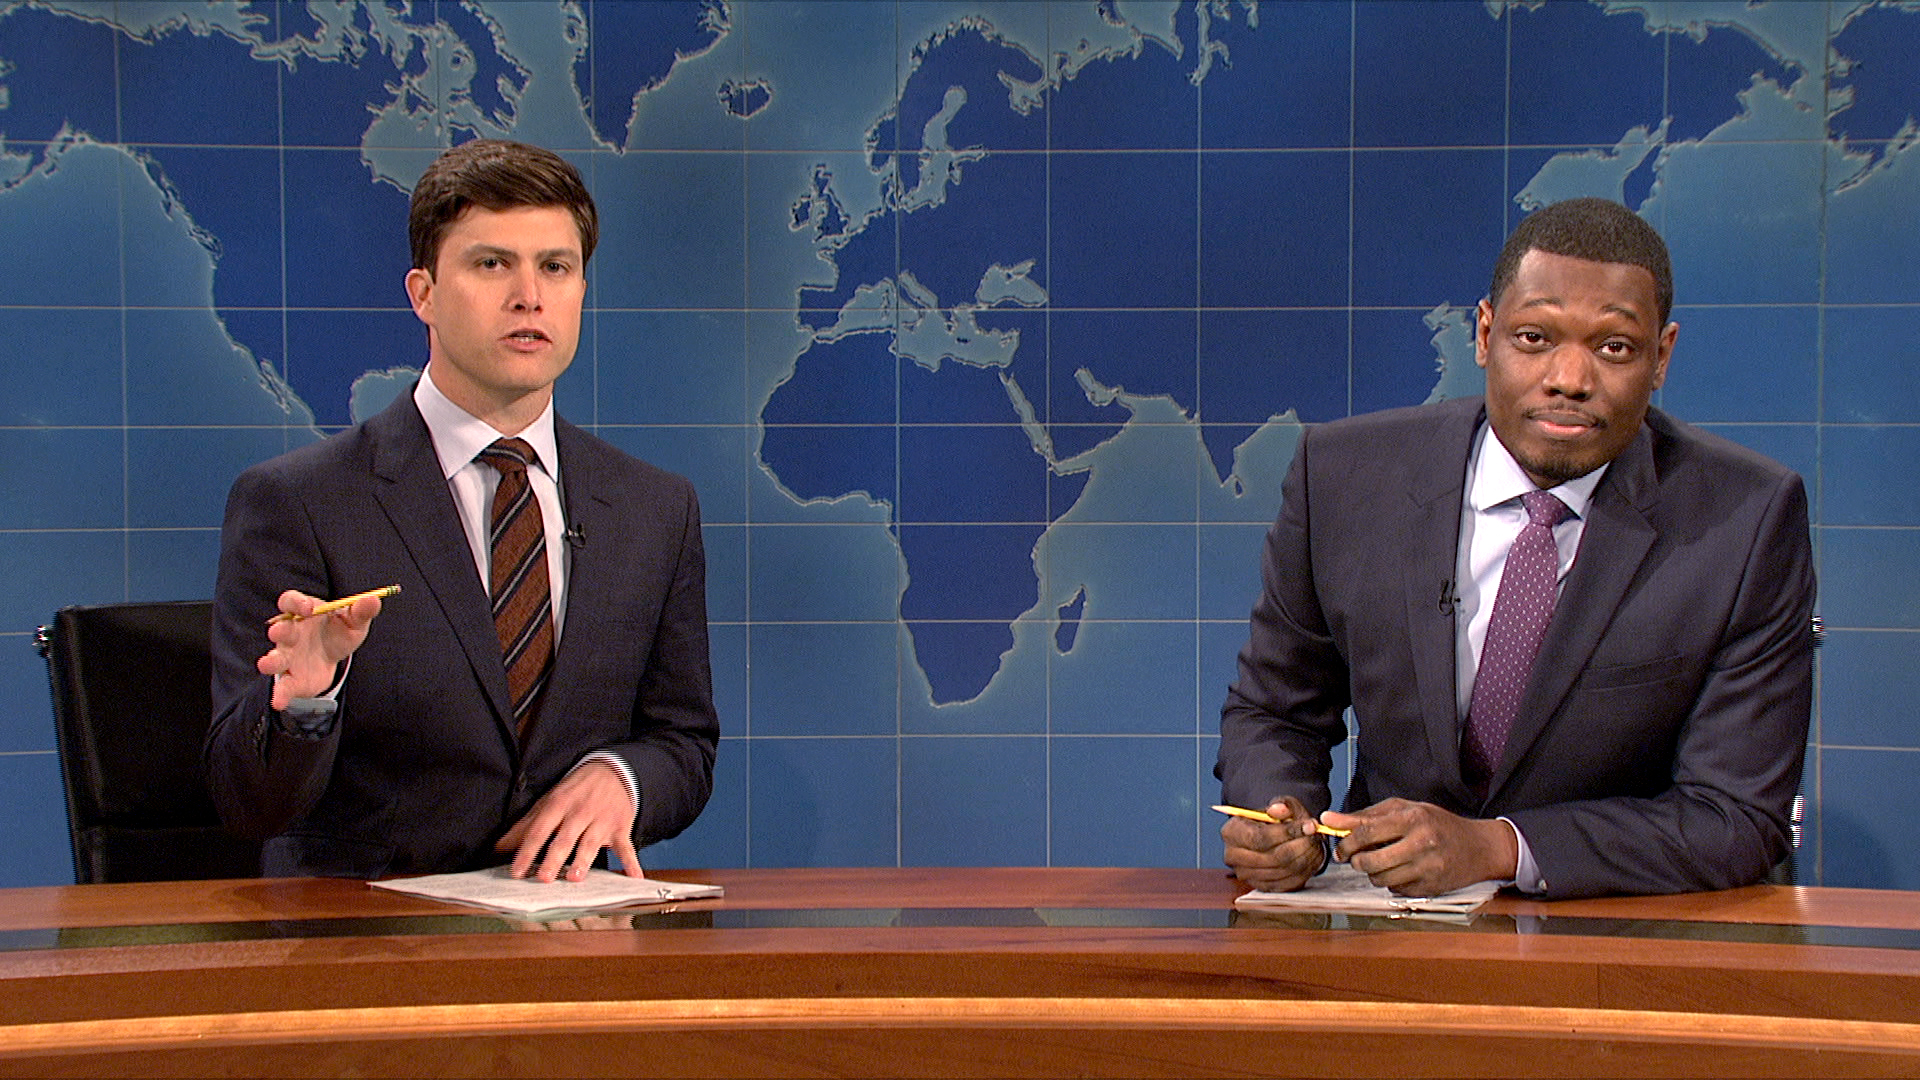 Watch Weekend Update: Colin Jost and Michael Che Talk Gun Control From Saturday Night ...